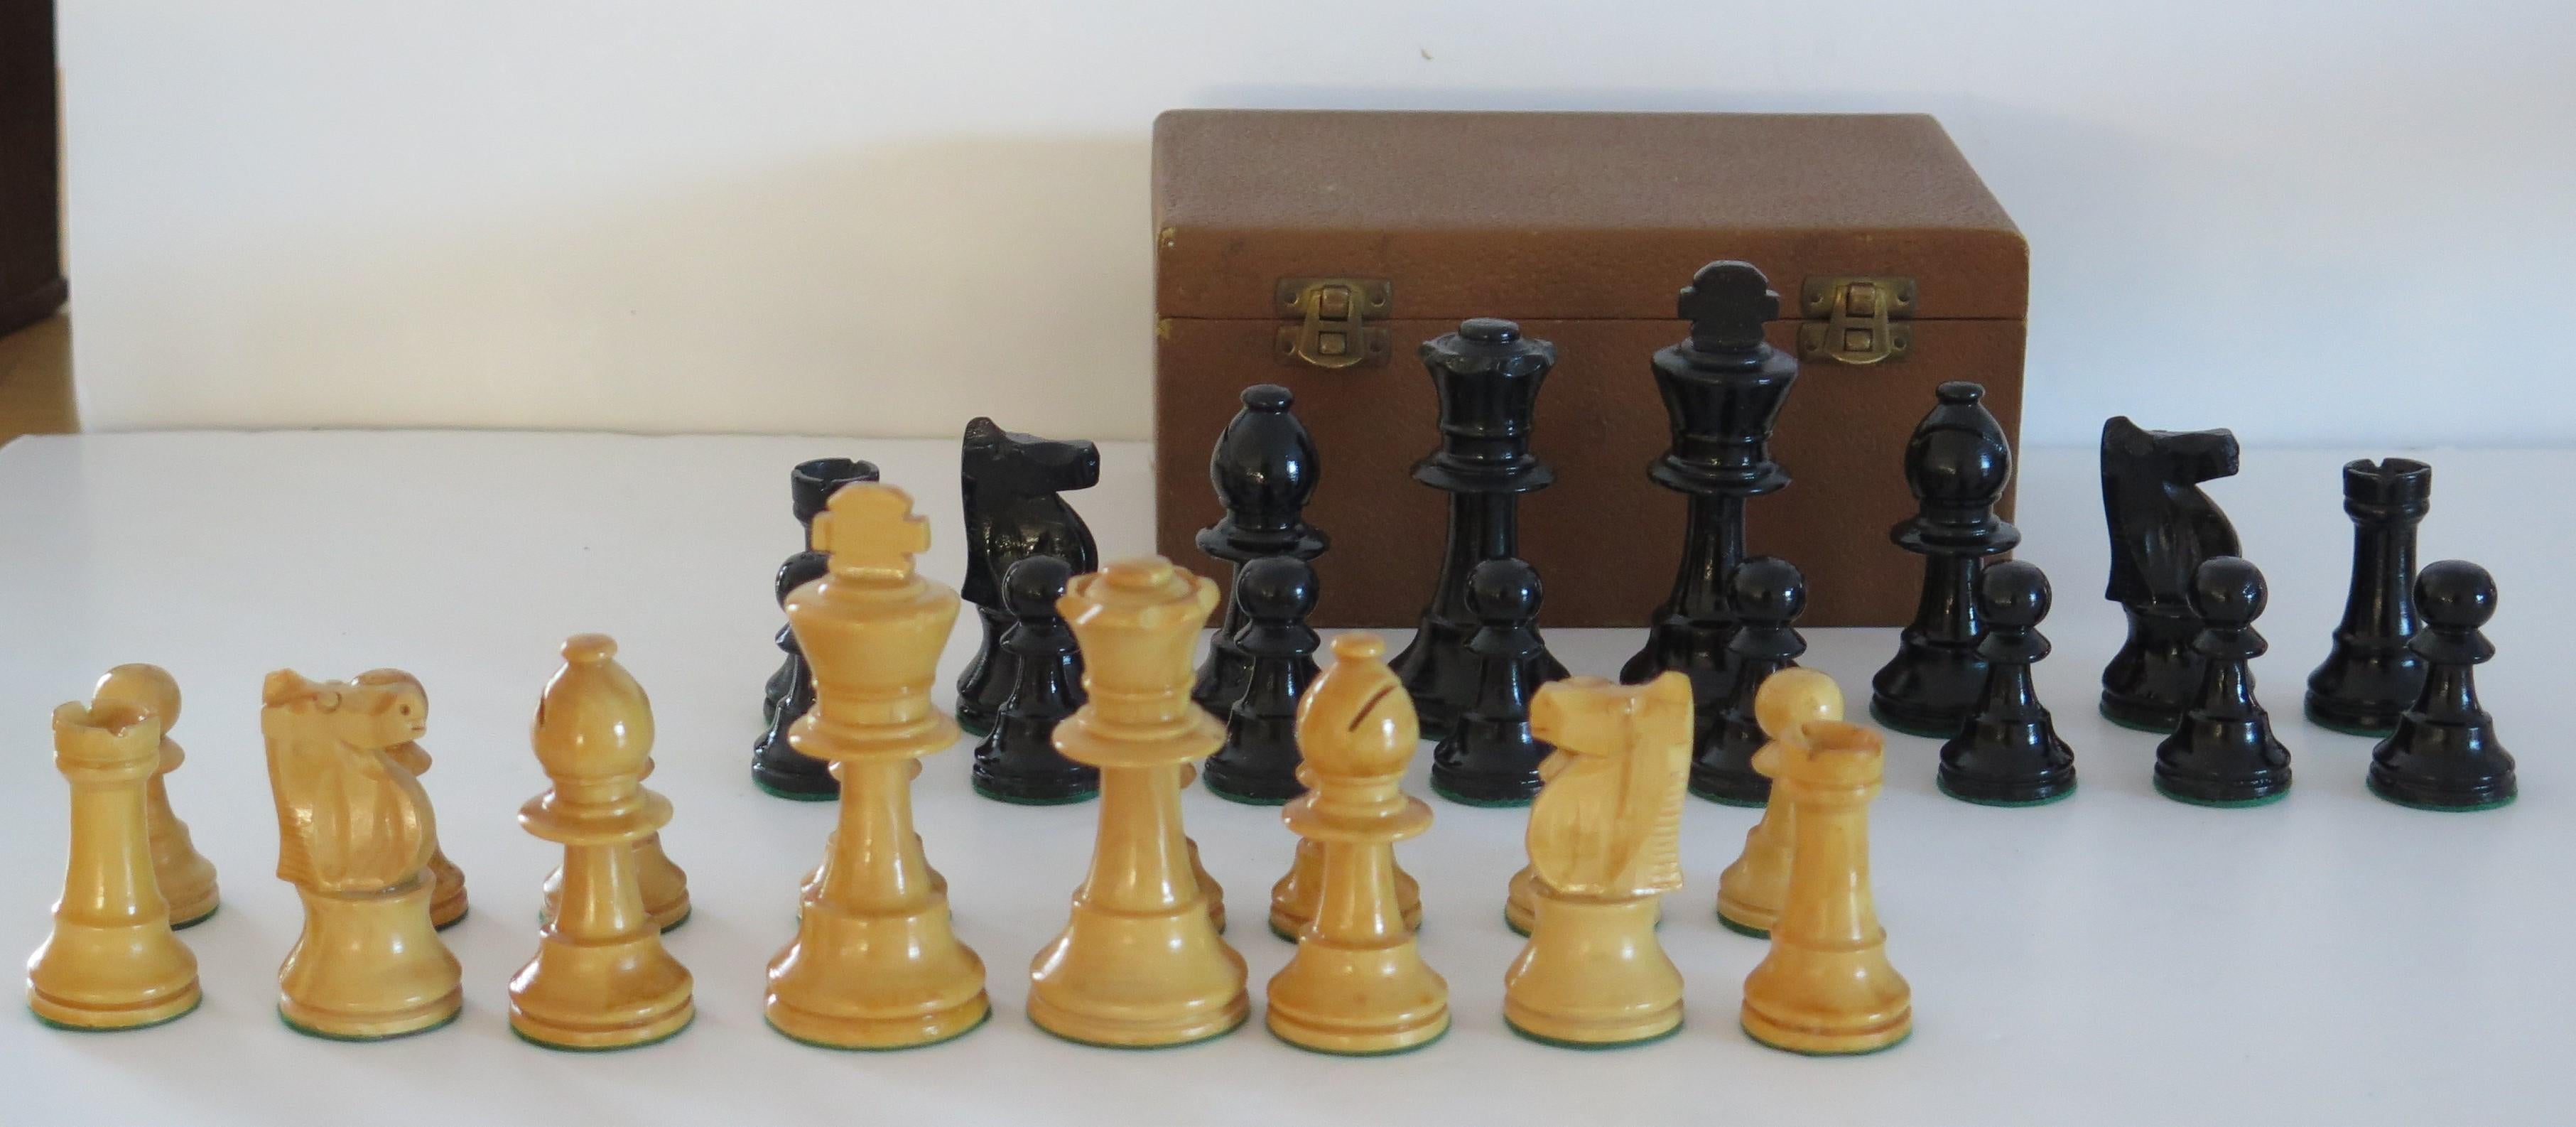 French Handmade Hardwood Weighted Lardy Chess Set in Box Kings, France, Circa 1930